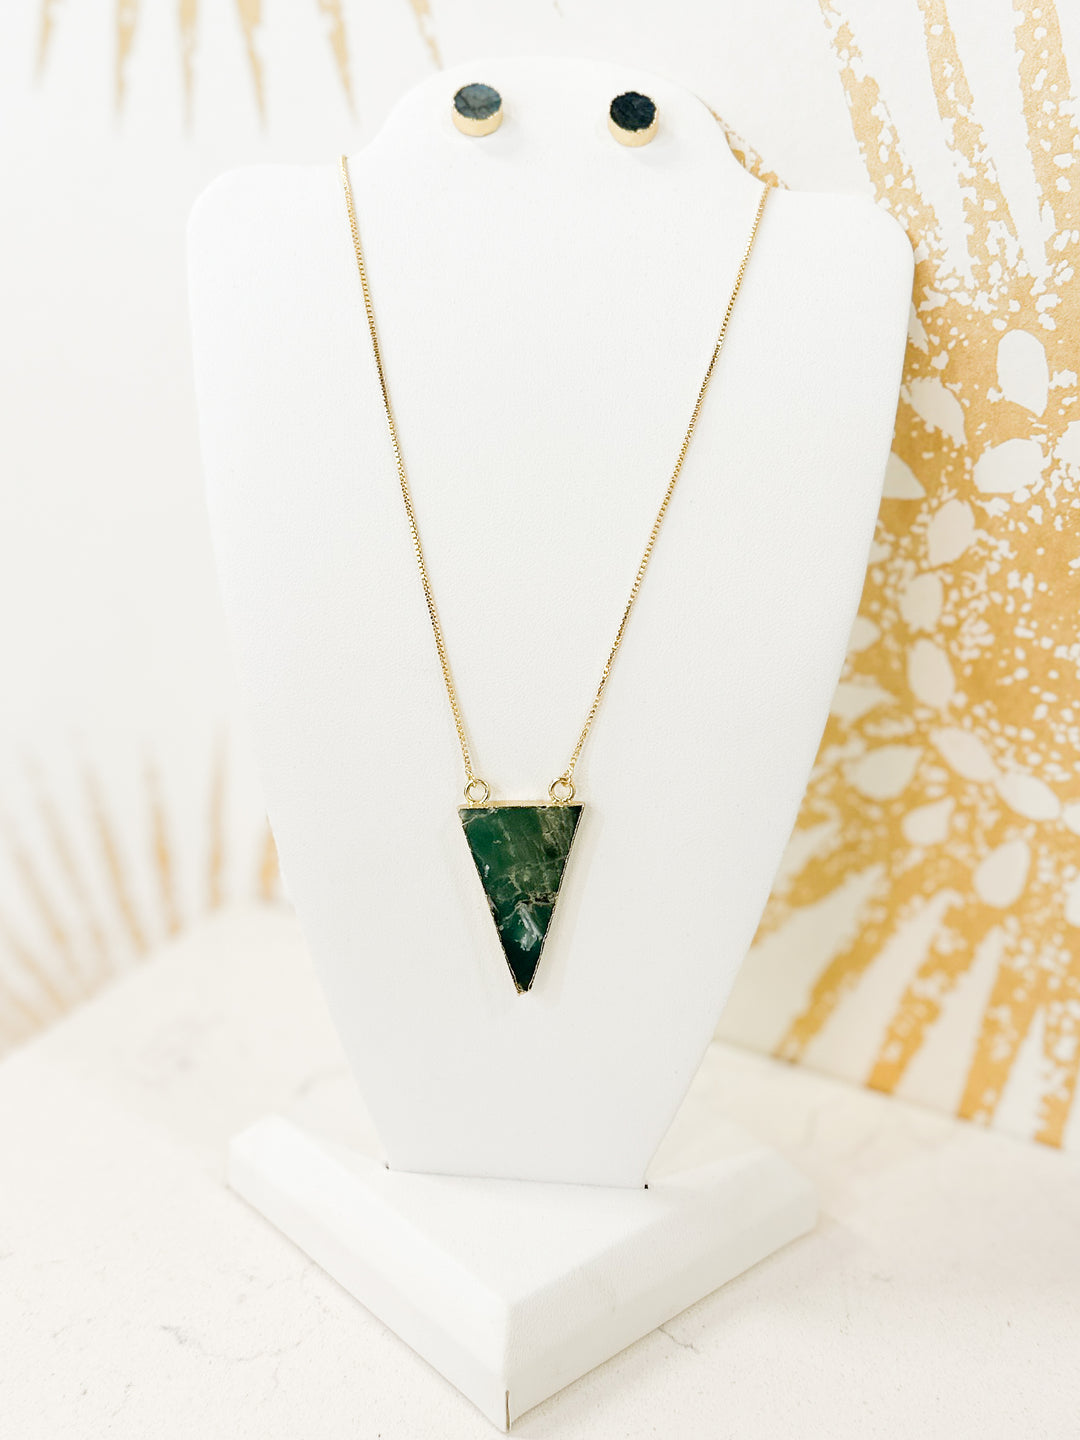 The Triangle Necklace